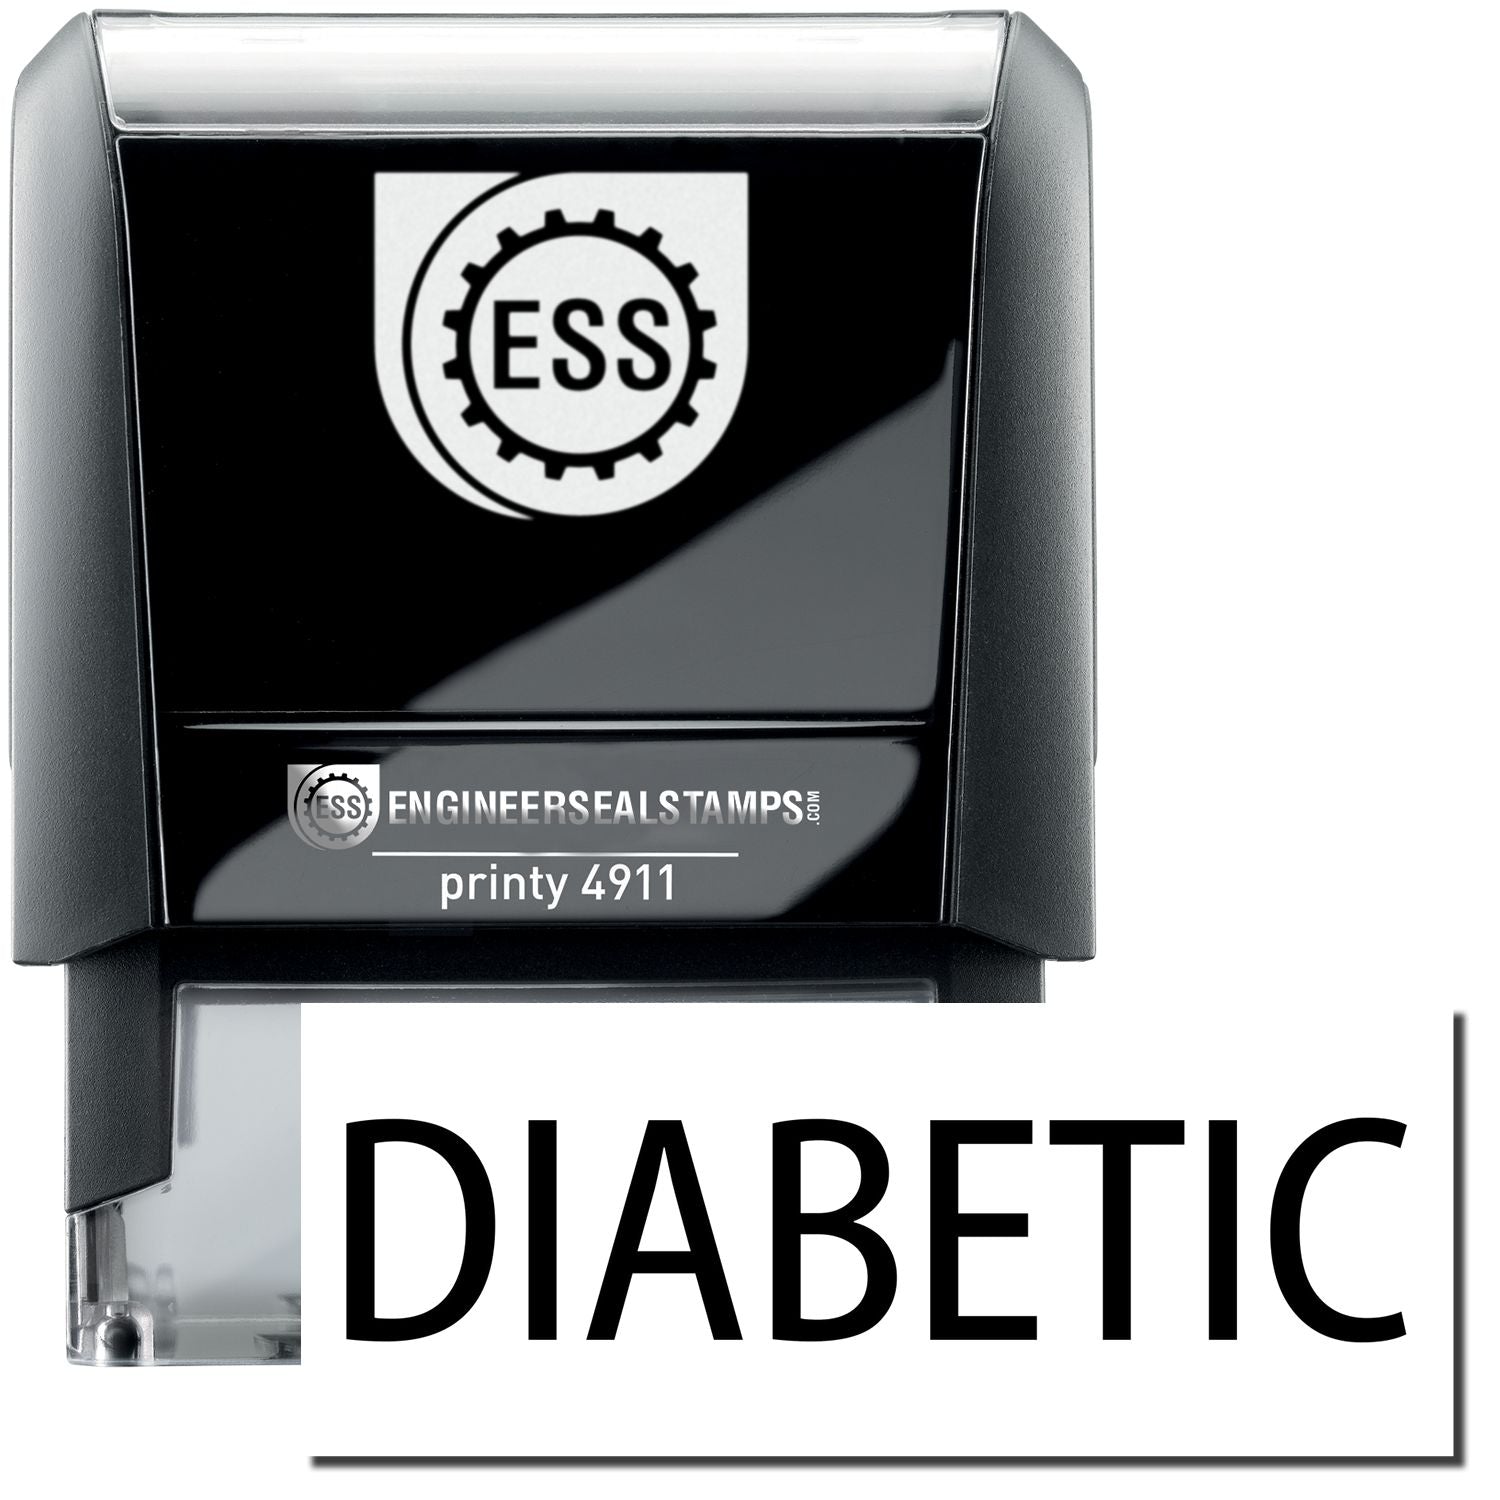 A self-inking stamp with a stamped image showing how the text "DIABETIC" is displayed after stamping.